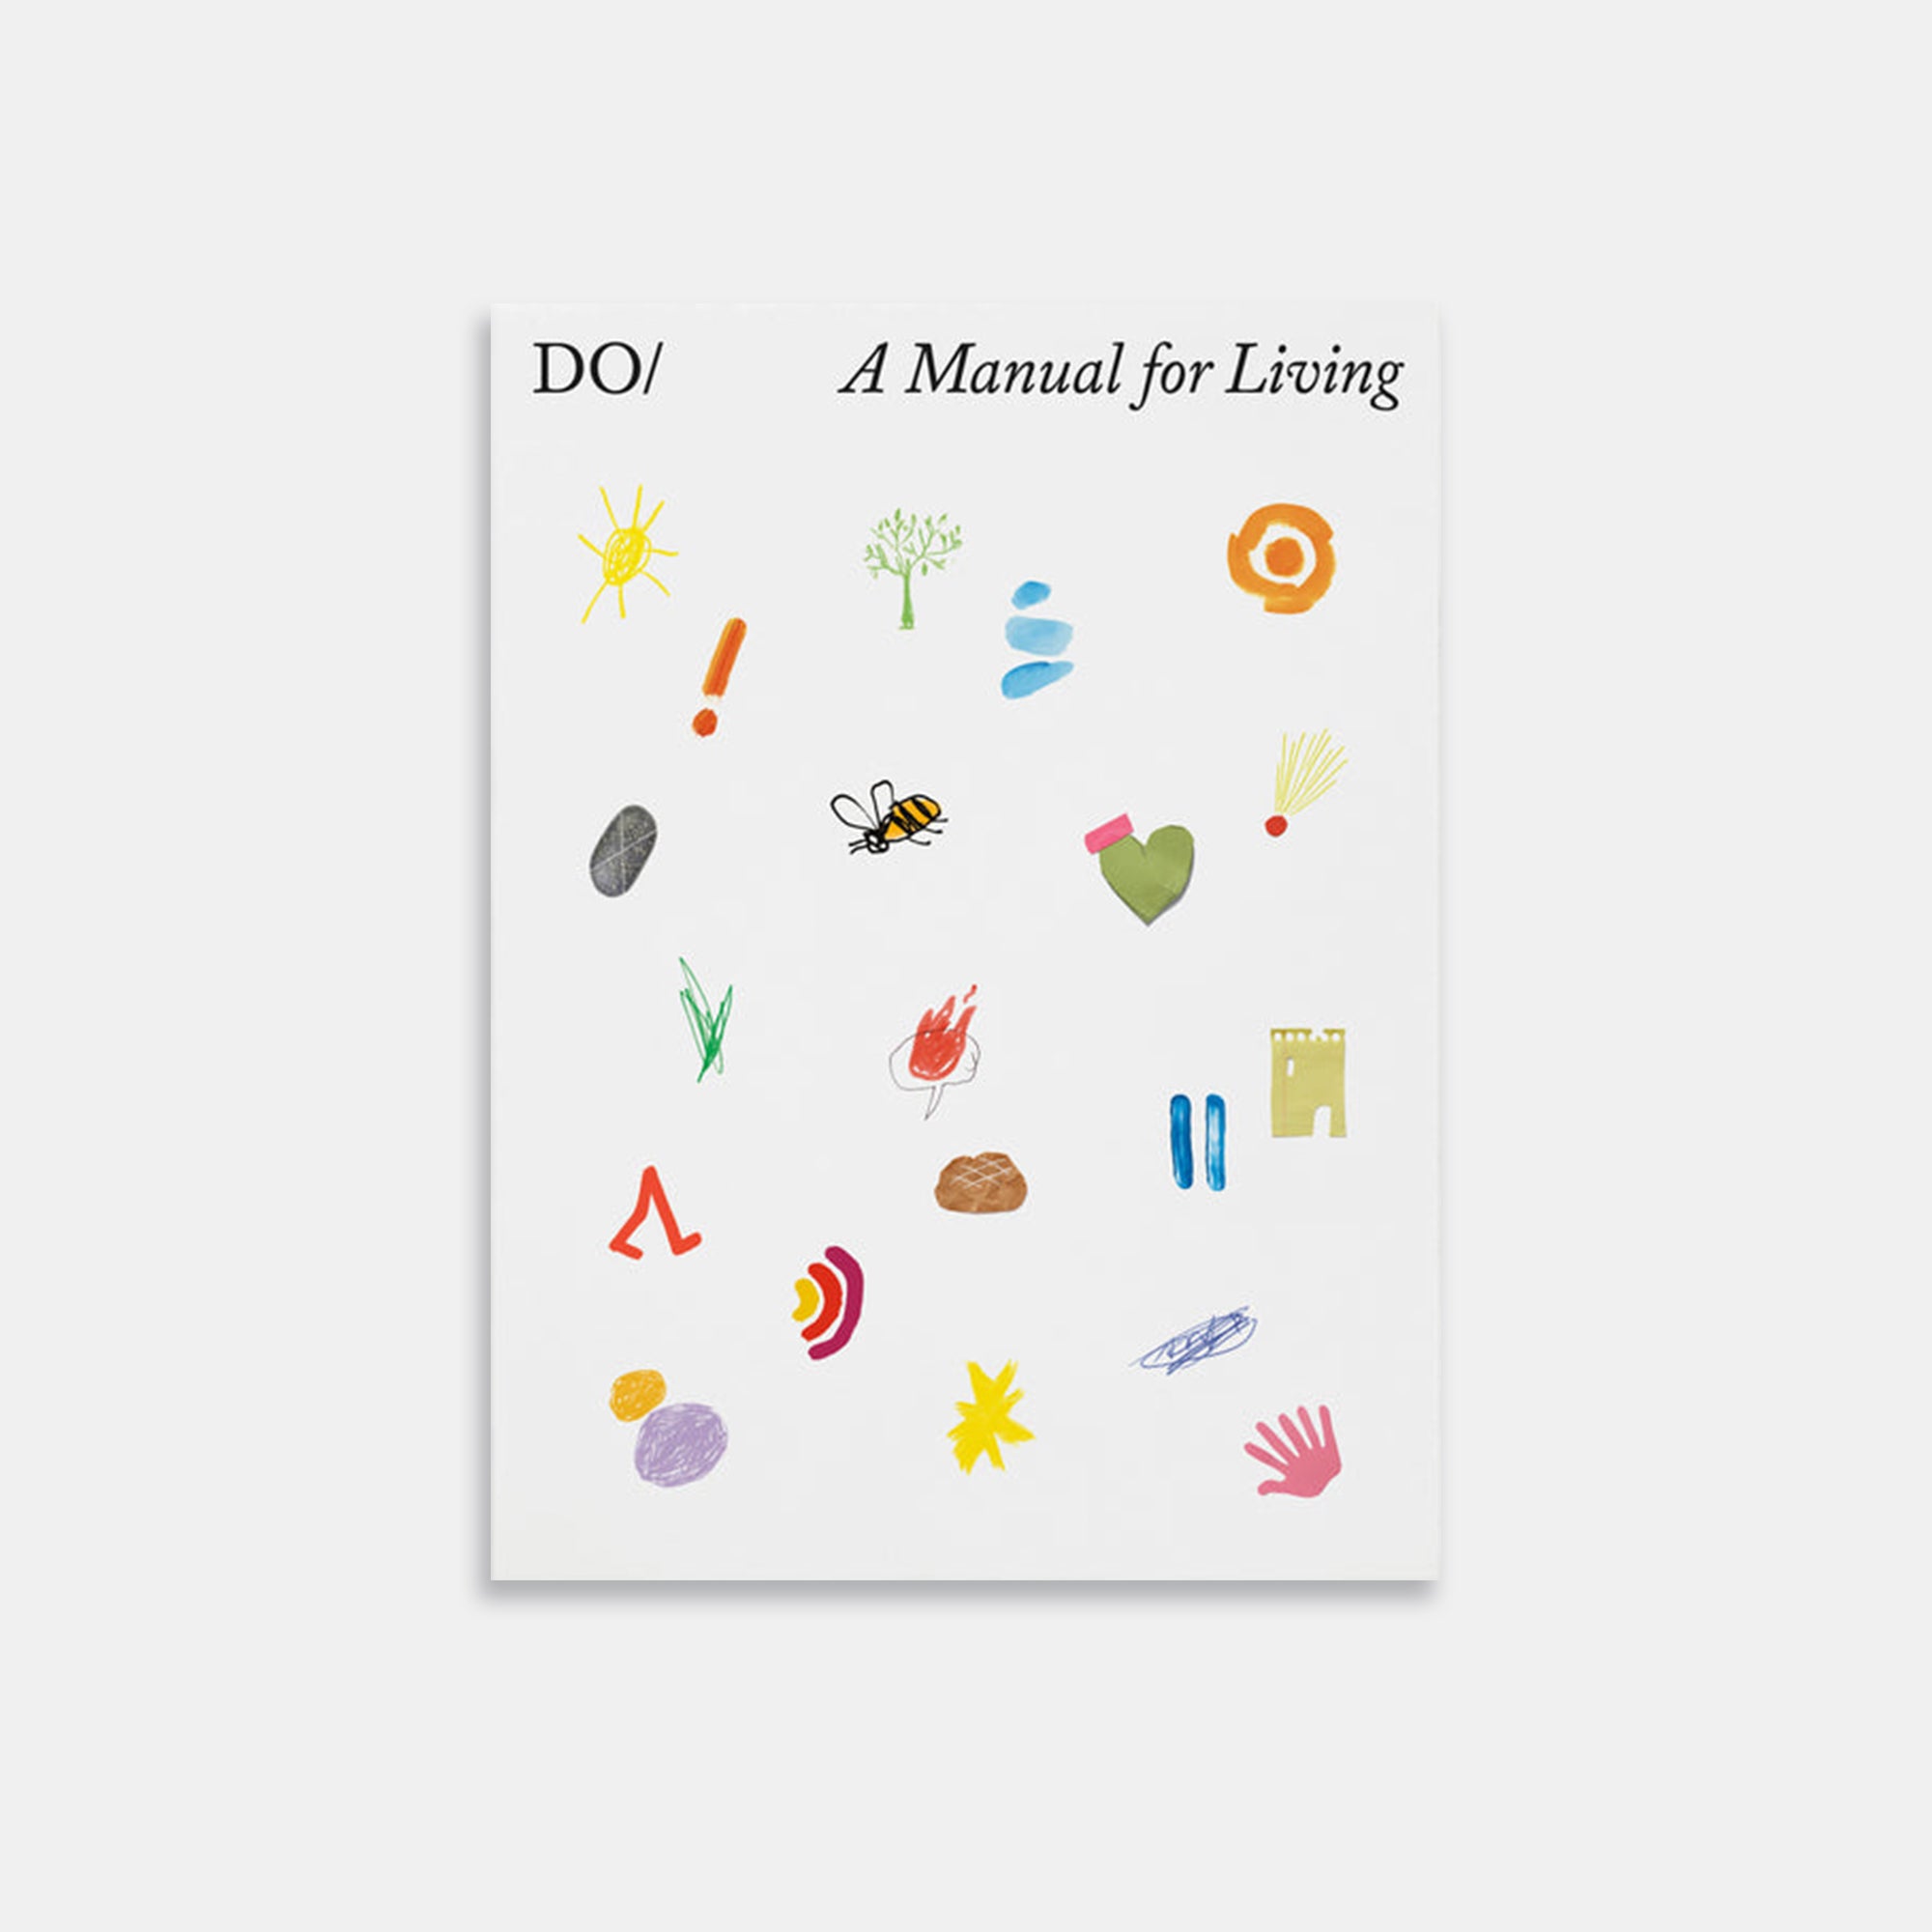 The Book of Do - A Manual for Living